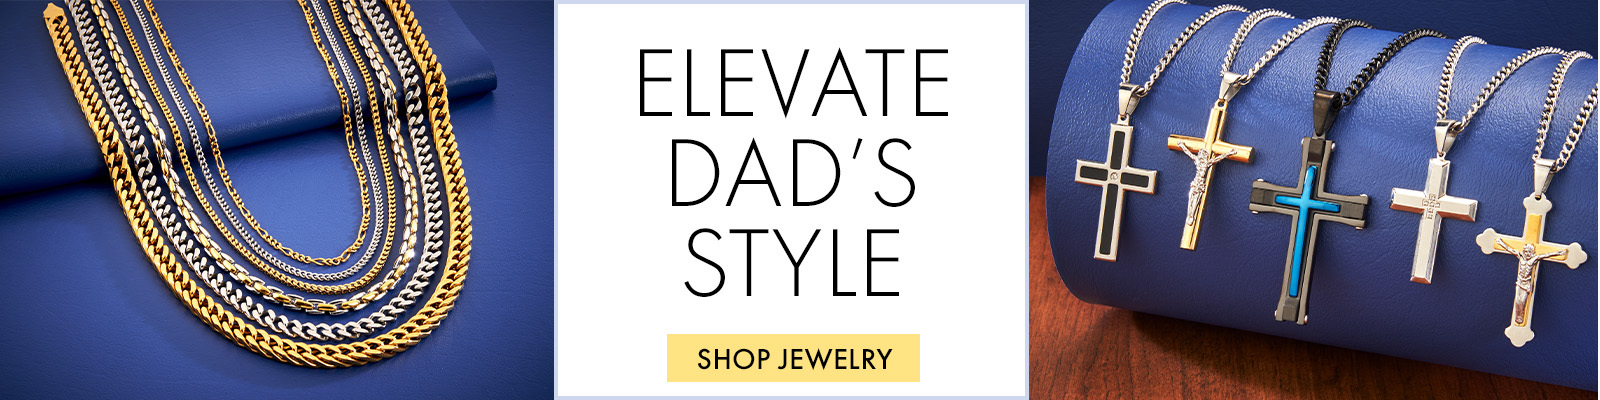 Elevate Dad's Style